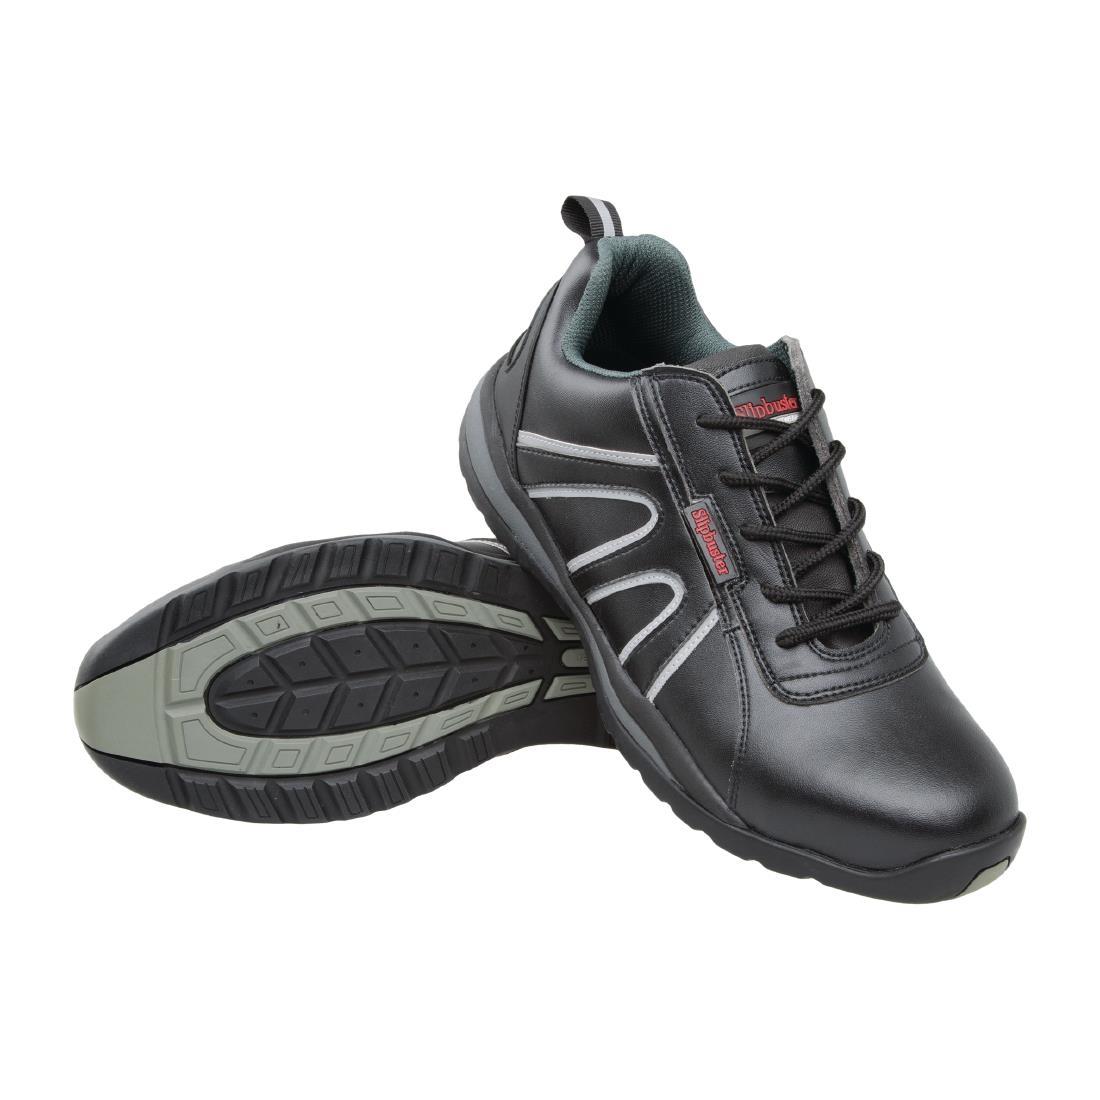 Slipbuster Safety Trainers Black 47 - A708-47  - 2